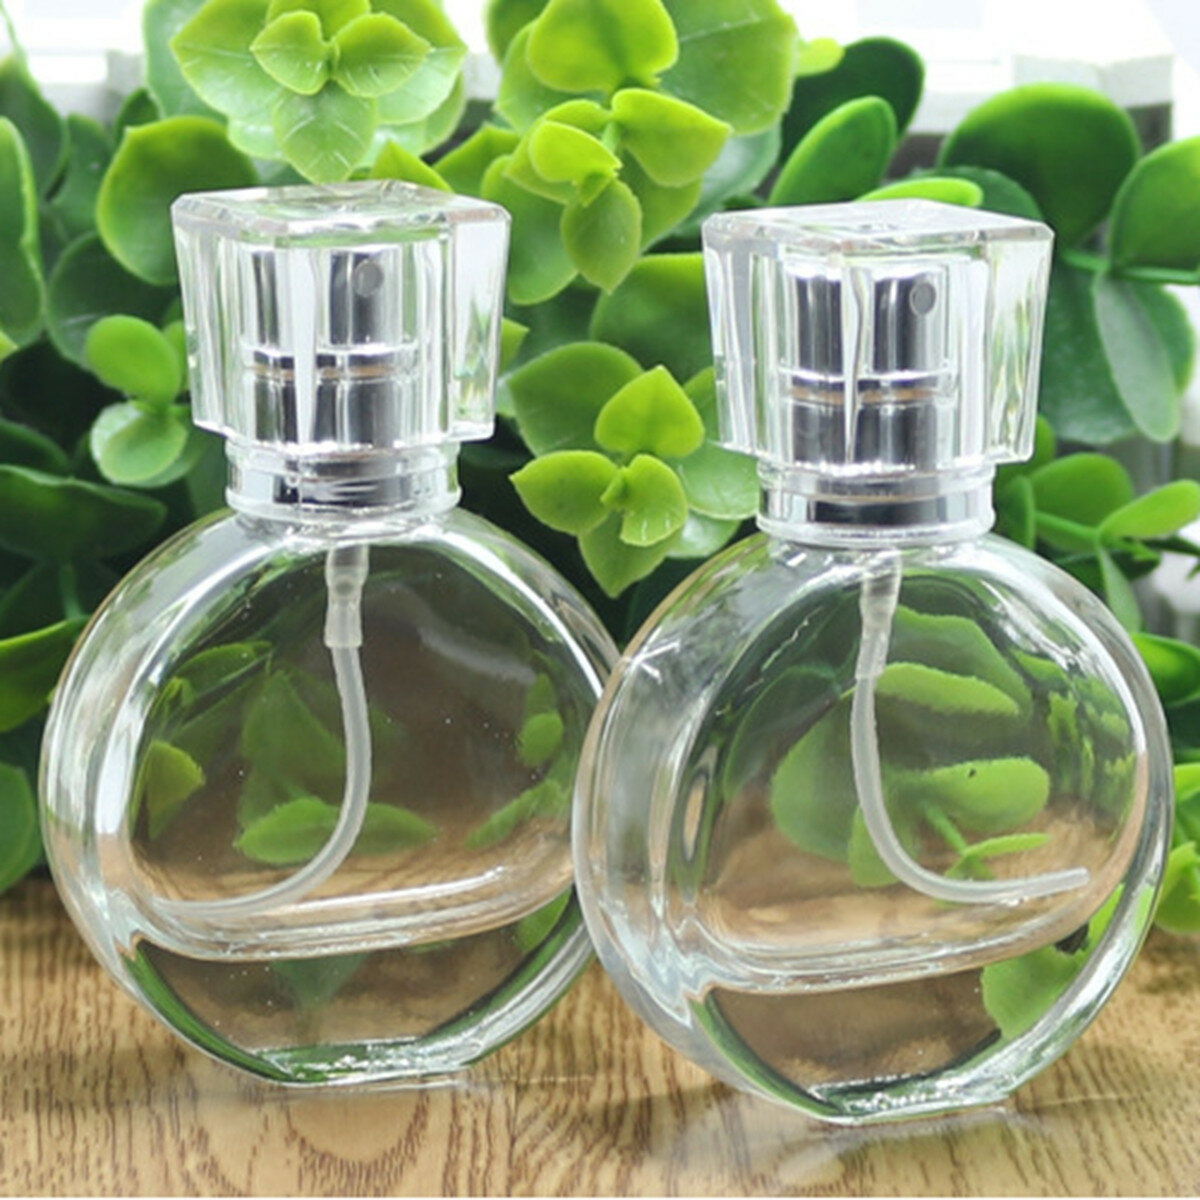 1pc Empty Refillable Perfume Spray Bottle Glass Fragrance Aroma Atomizer Container Travel